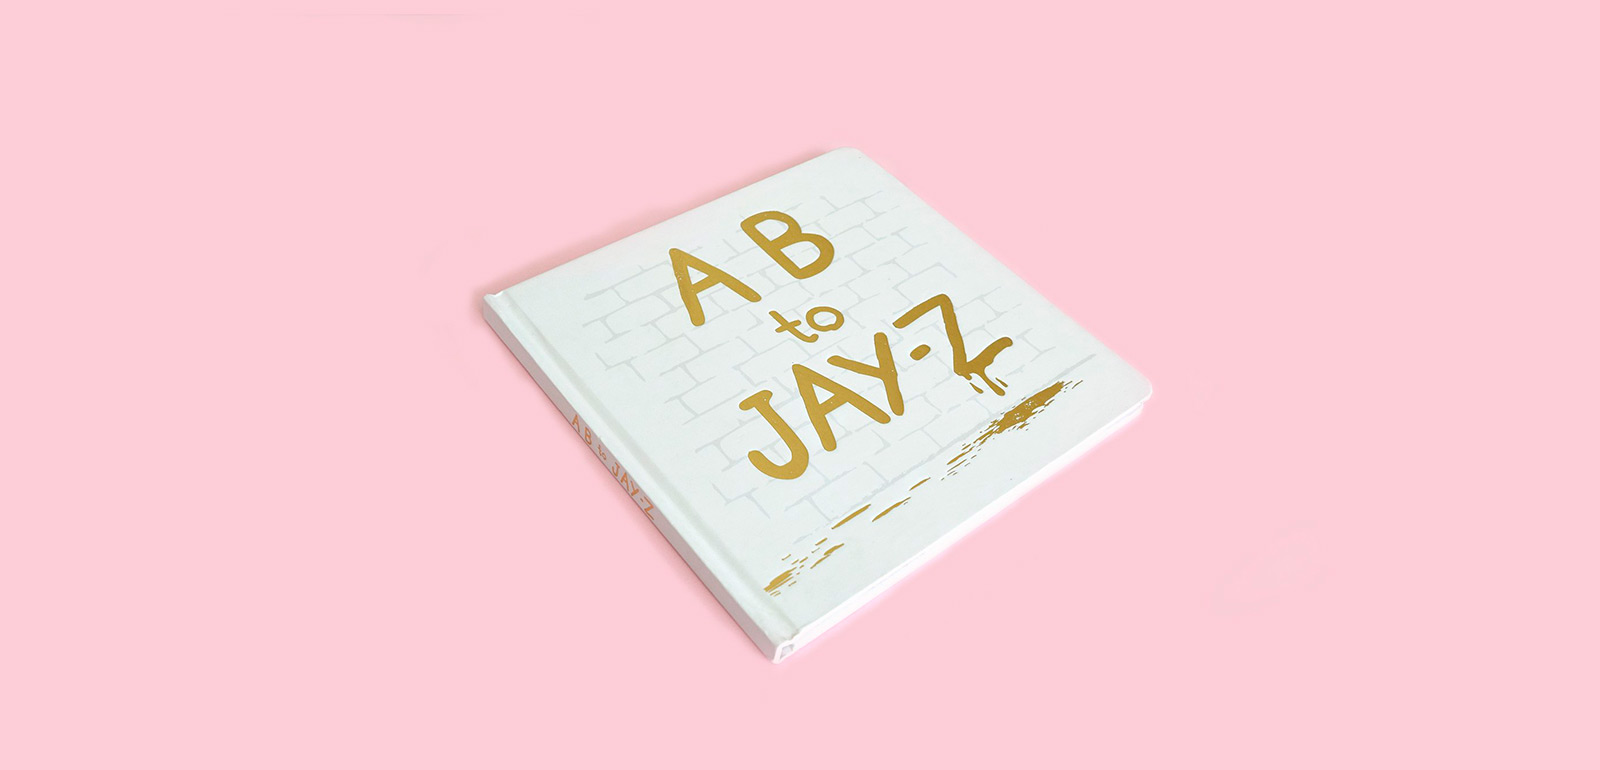 'A B to Jay-Z' by The Little Homie